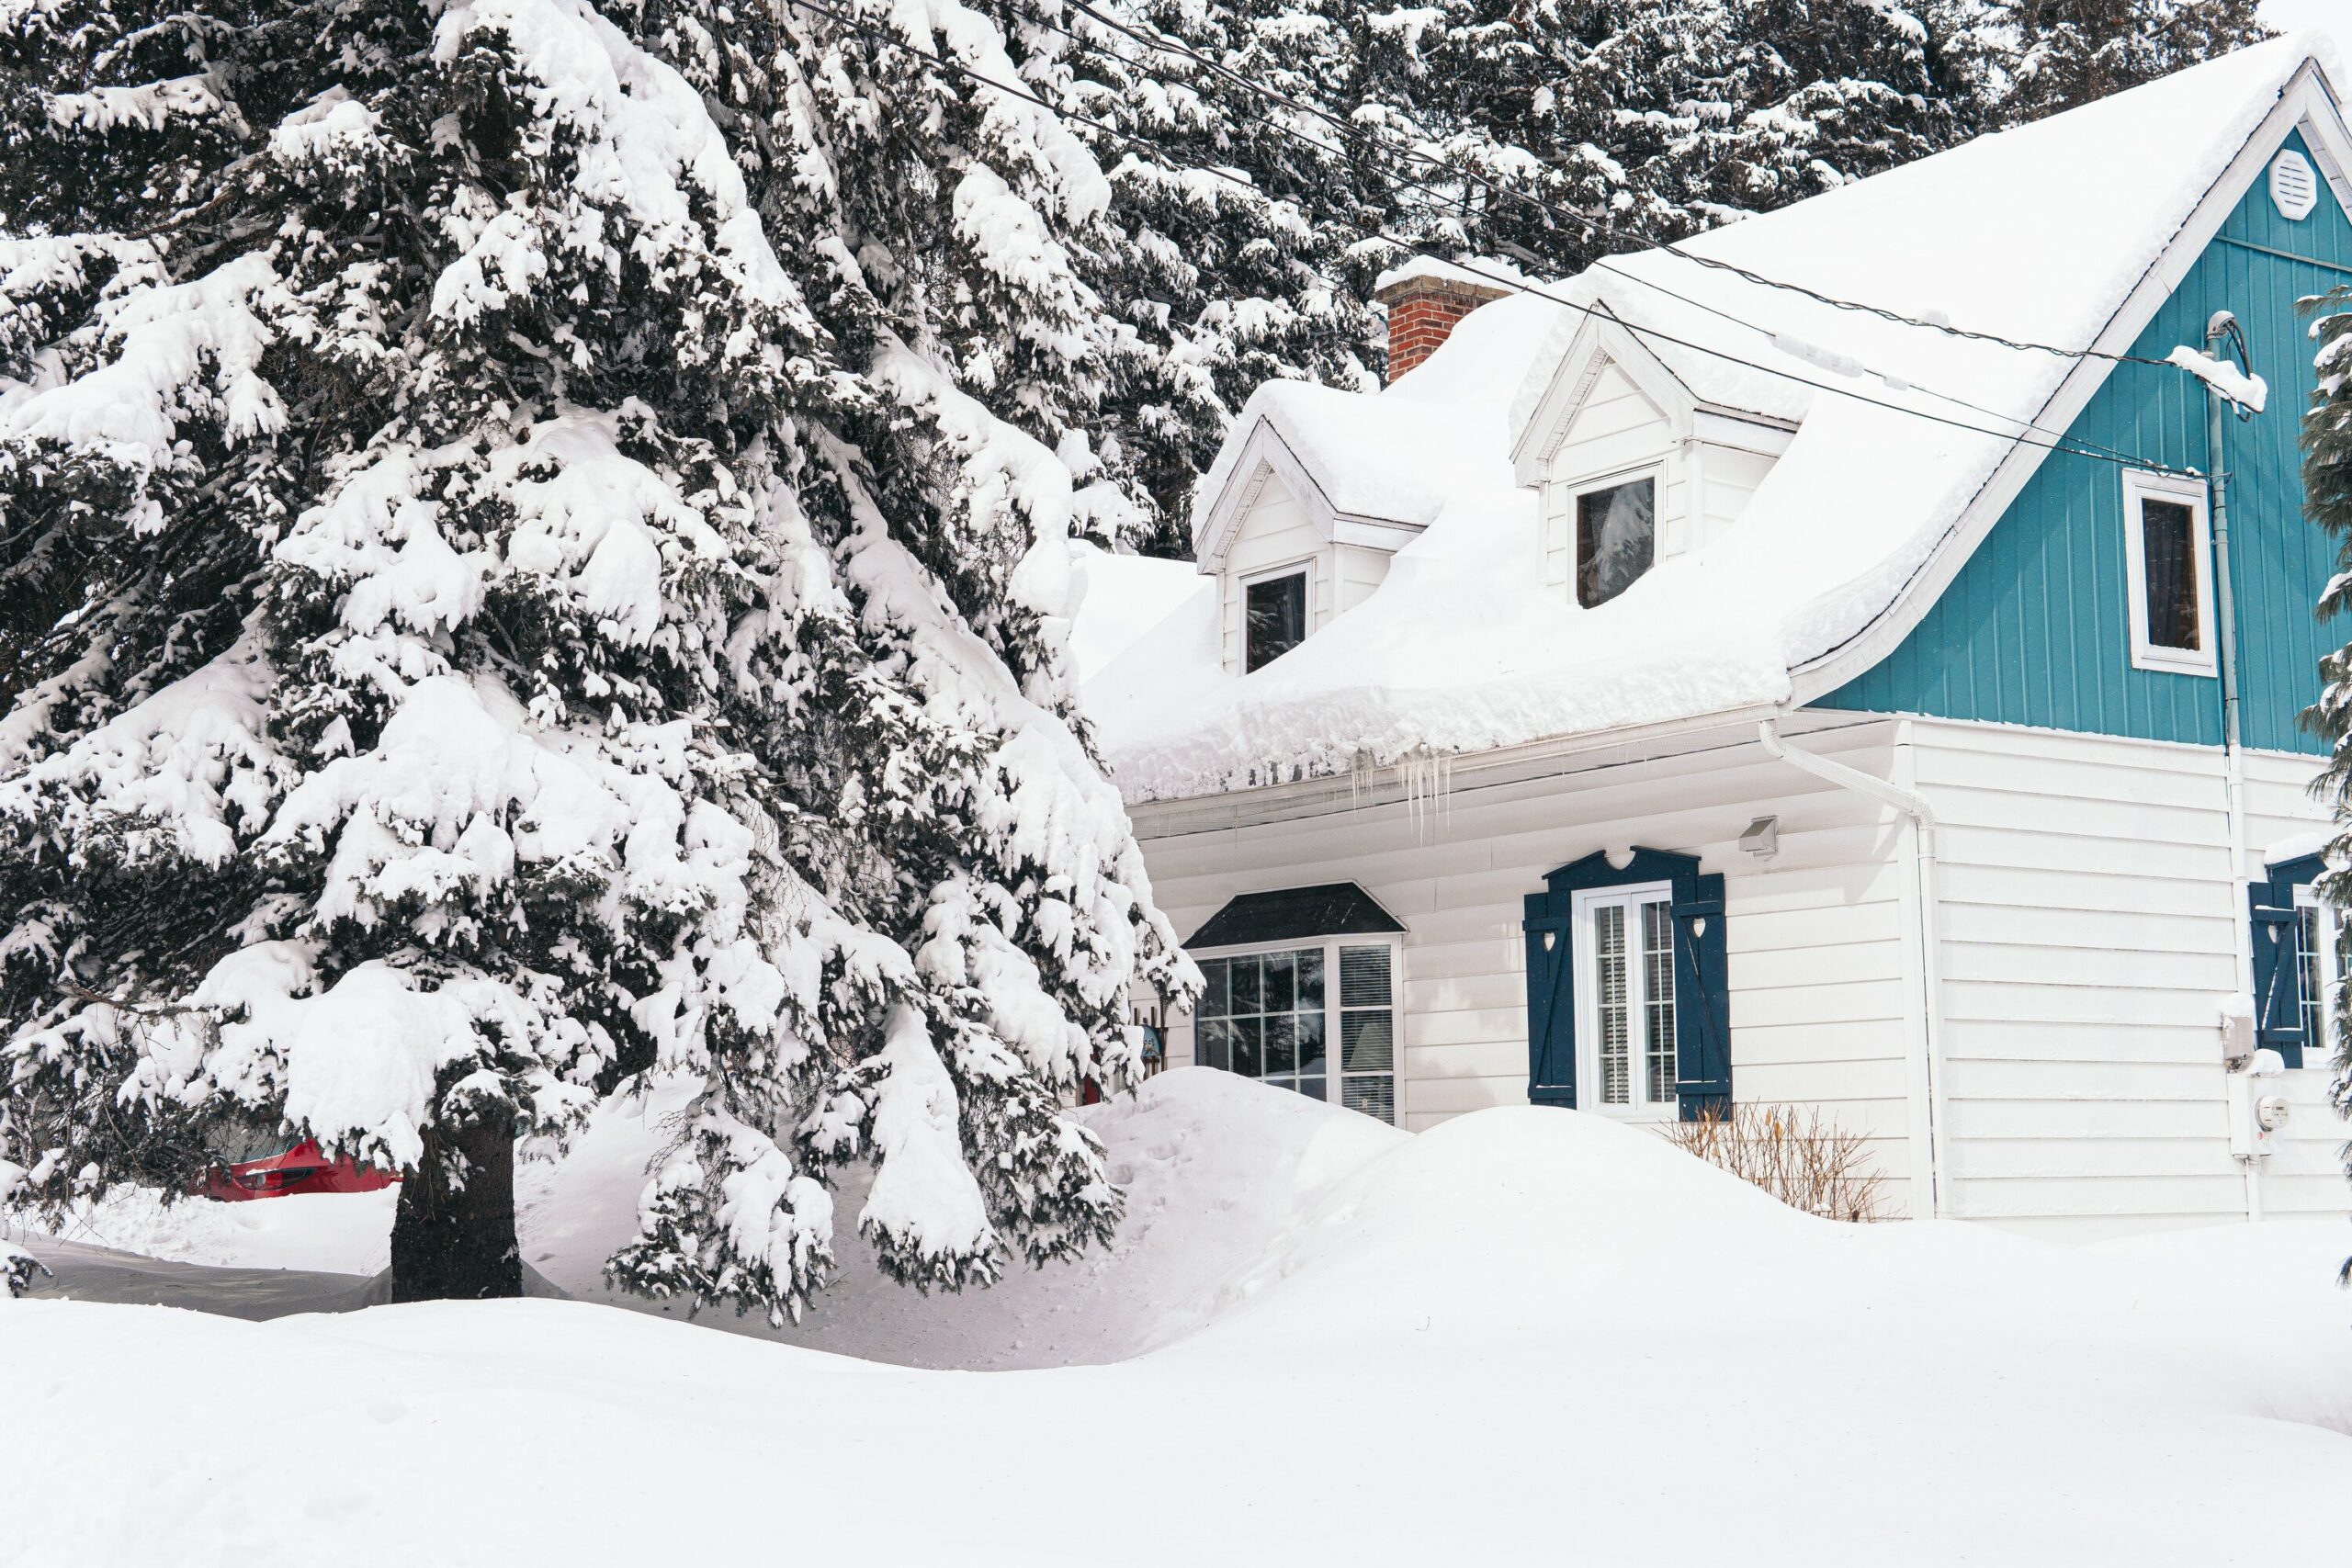 3 Reasons to Remodel During Winter